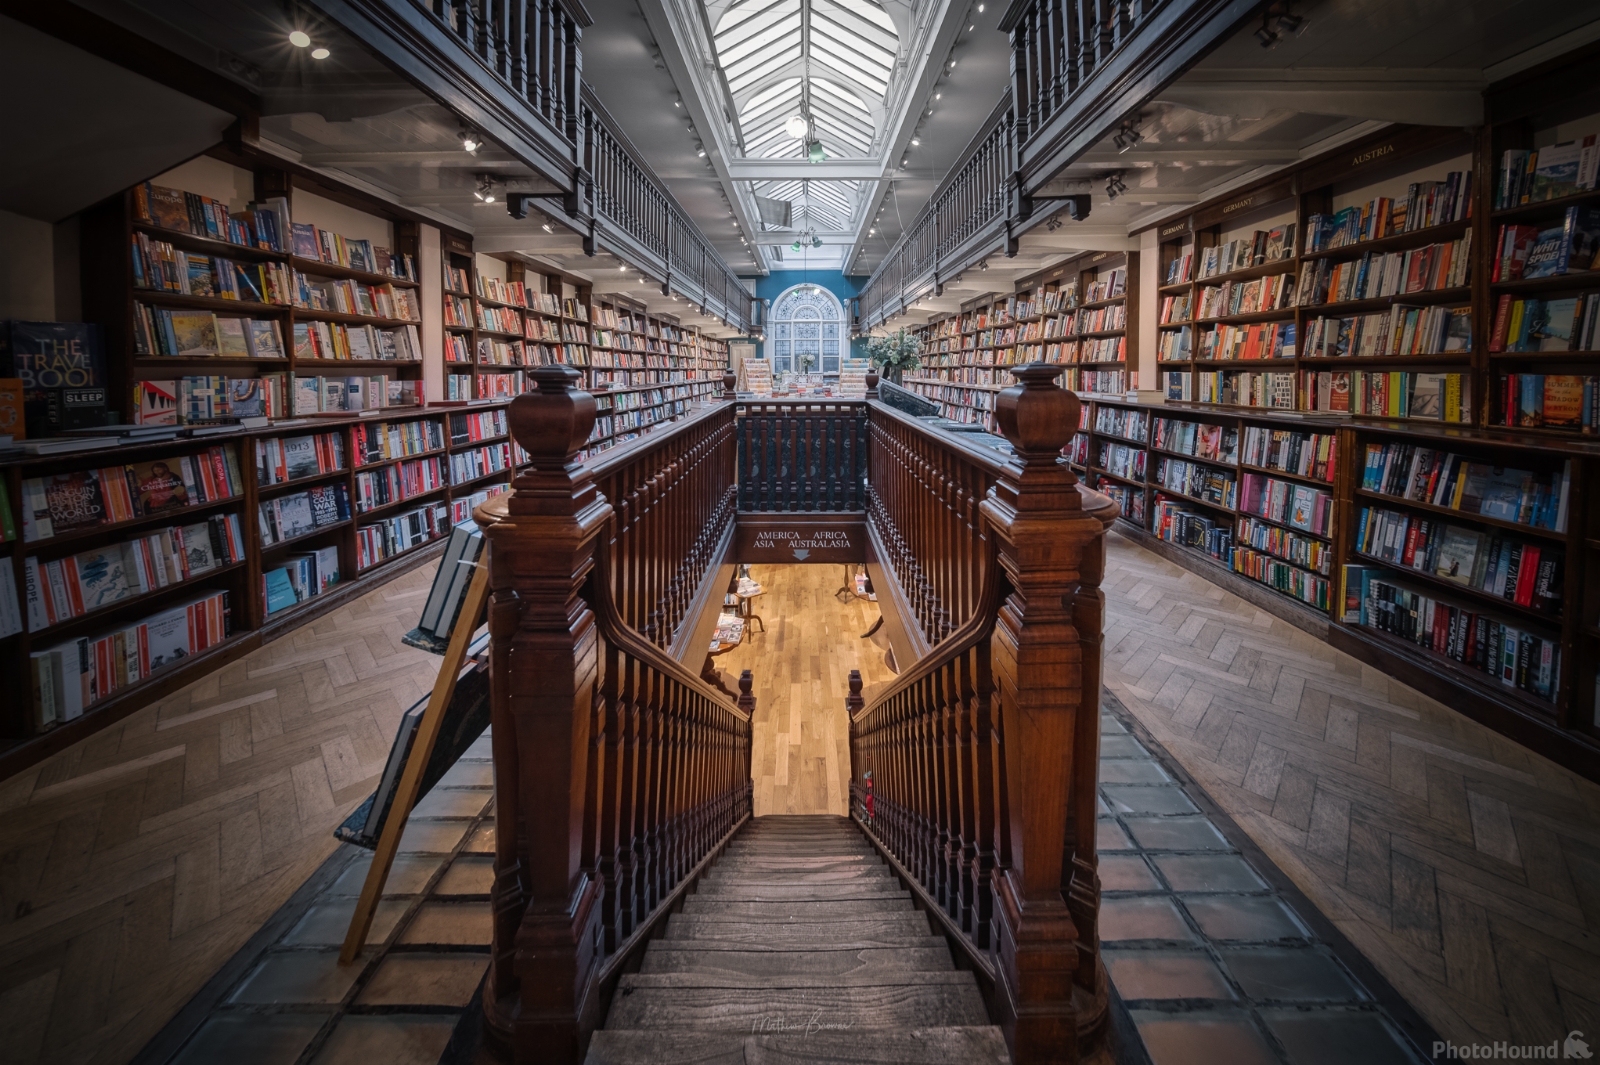 Image of Daunt Books by Mathew Browne